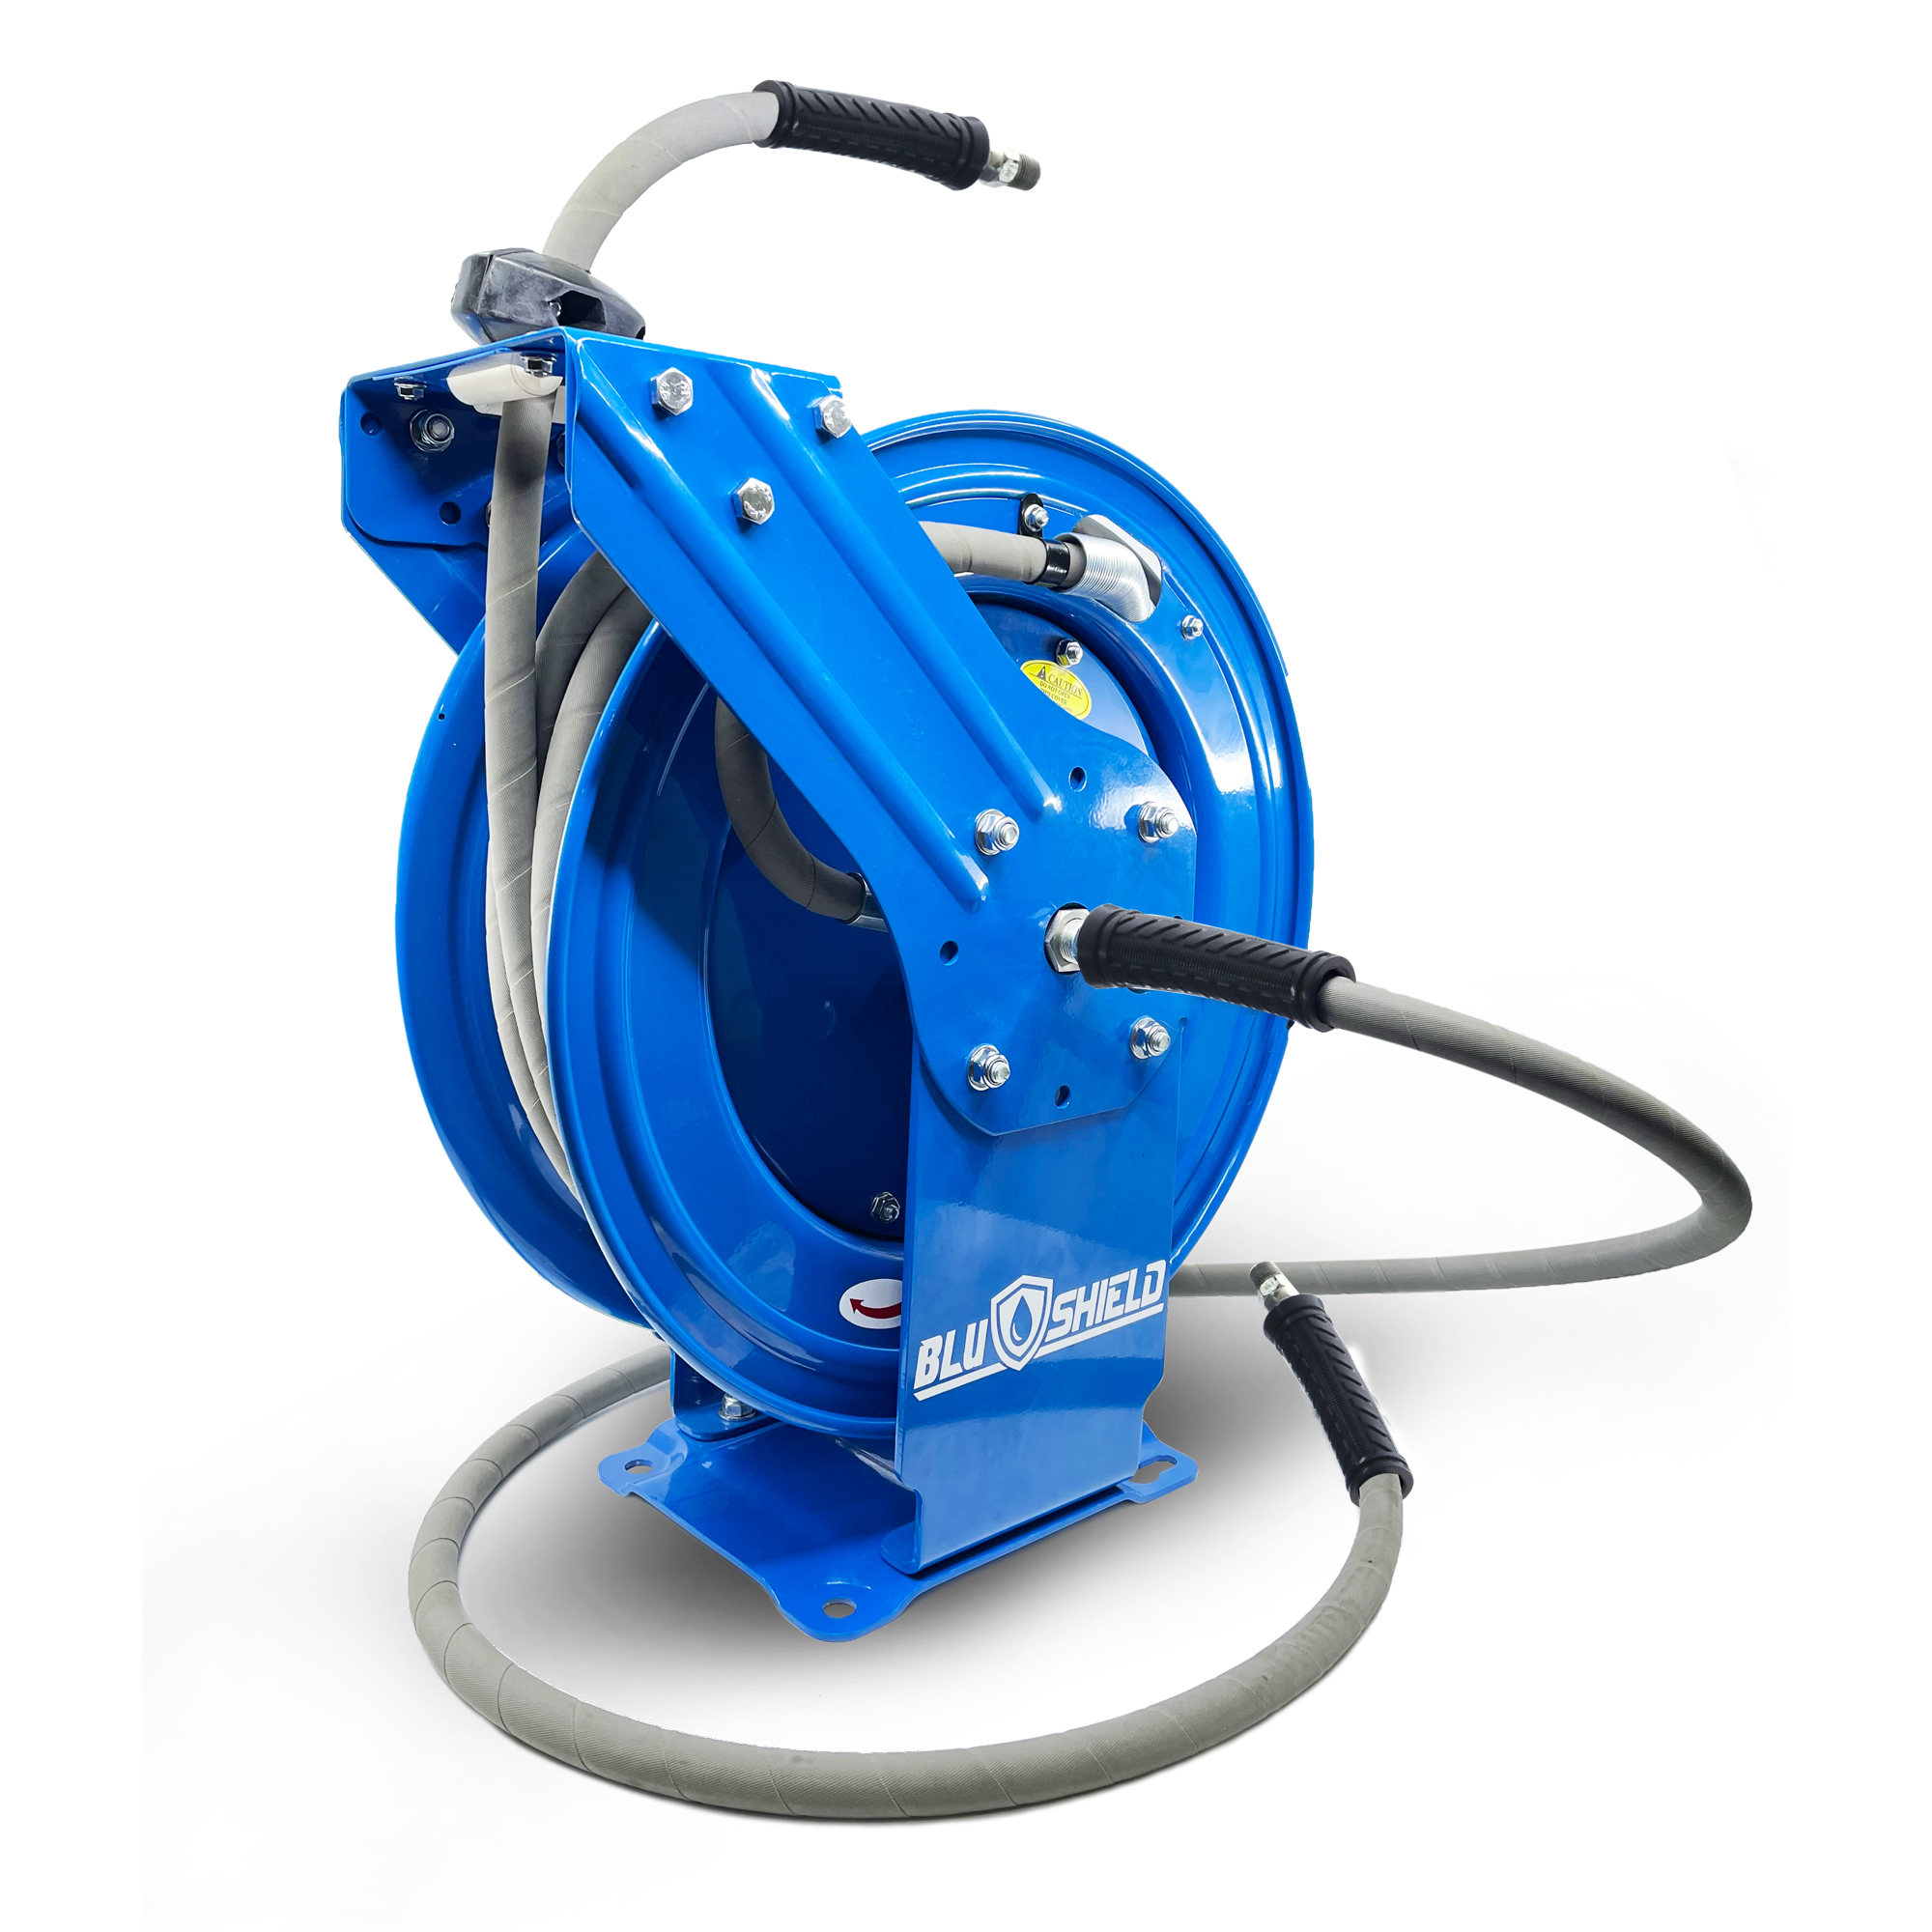 BluShield, PW Non- Marking Hose Reel 1/4Inch x 100ft., Hose Length Capacity 100 ft, Max. Pressure 3100 PSI, Model PWPR14100-31-NM